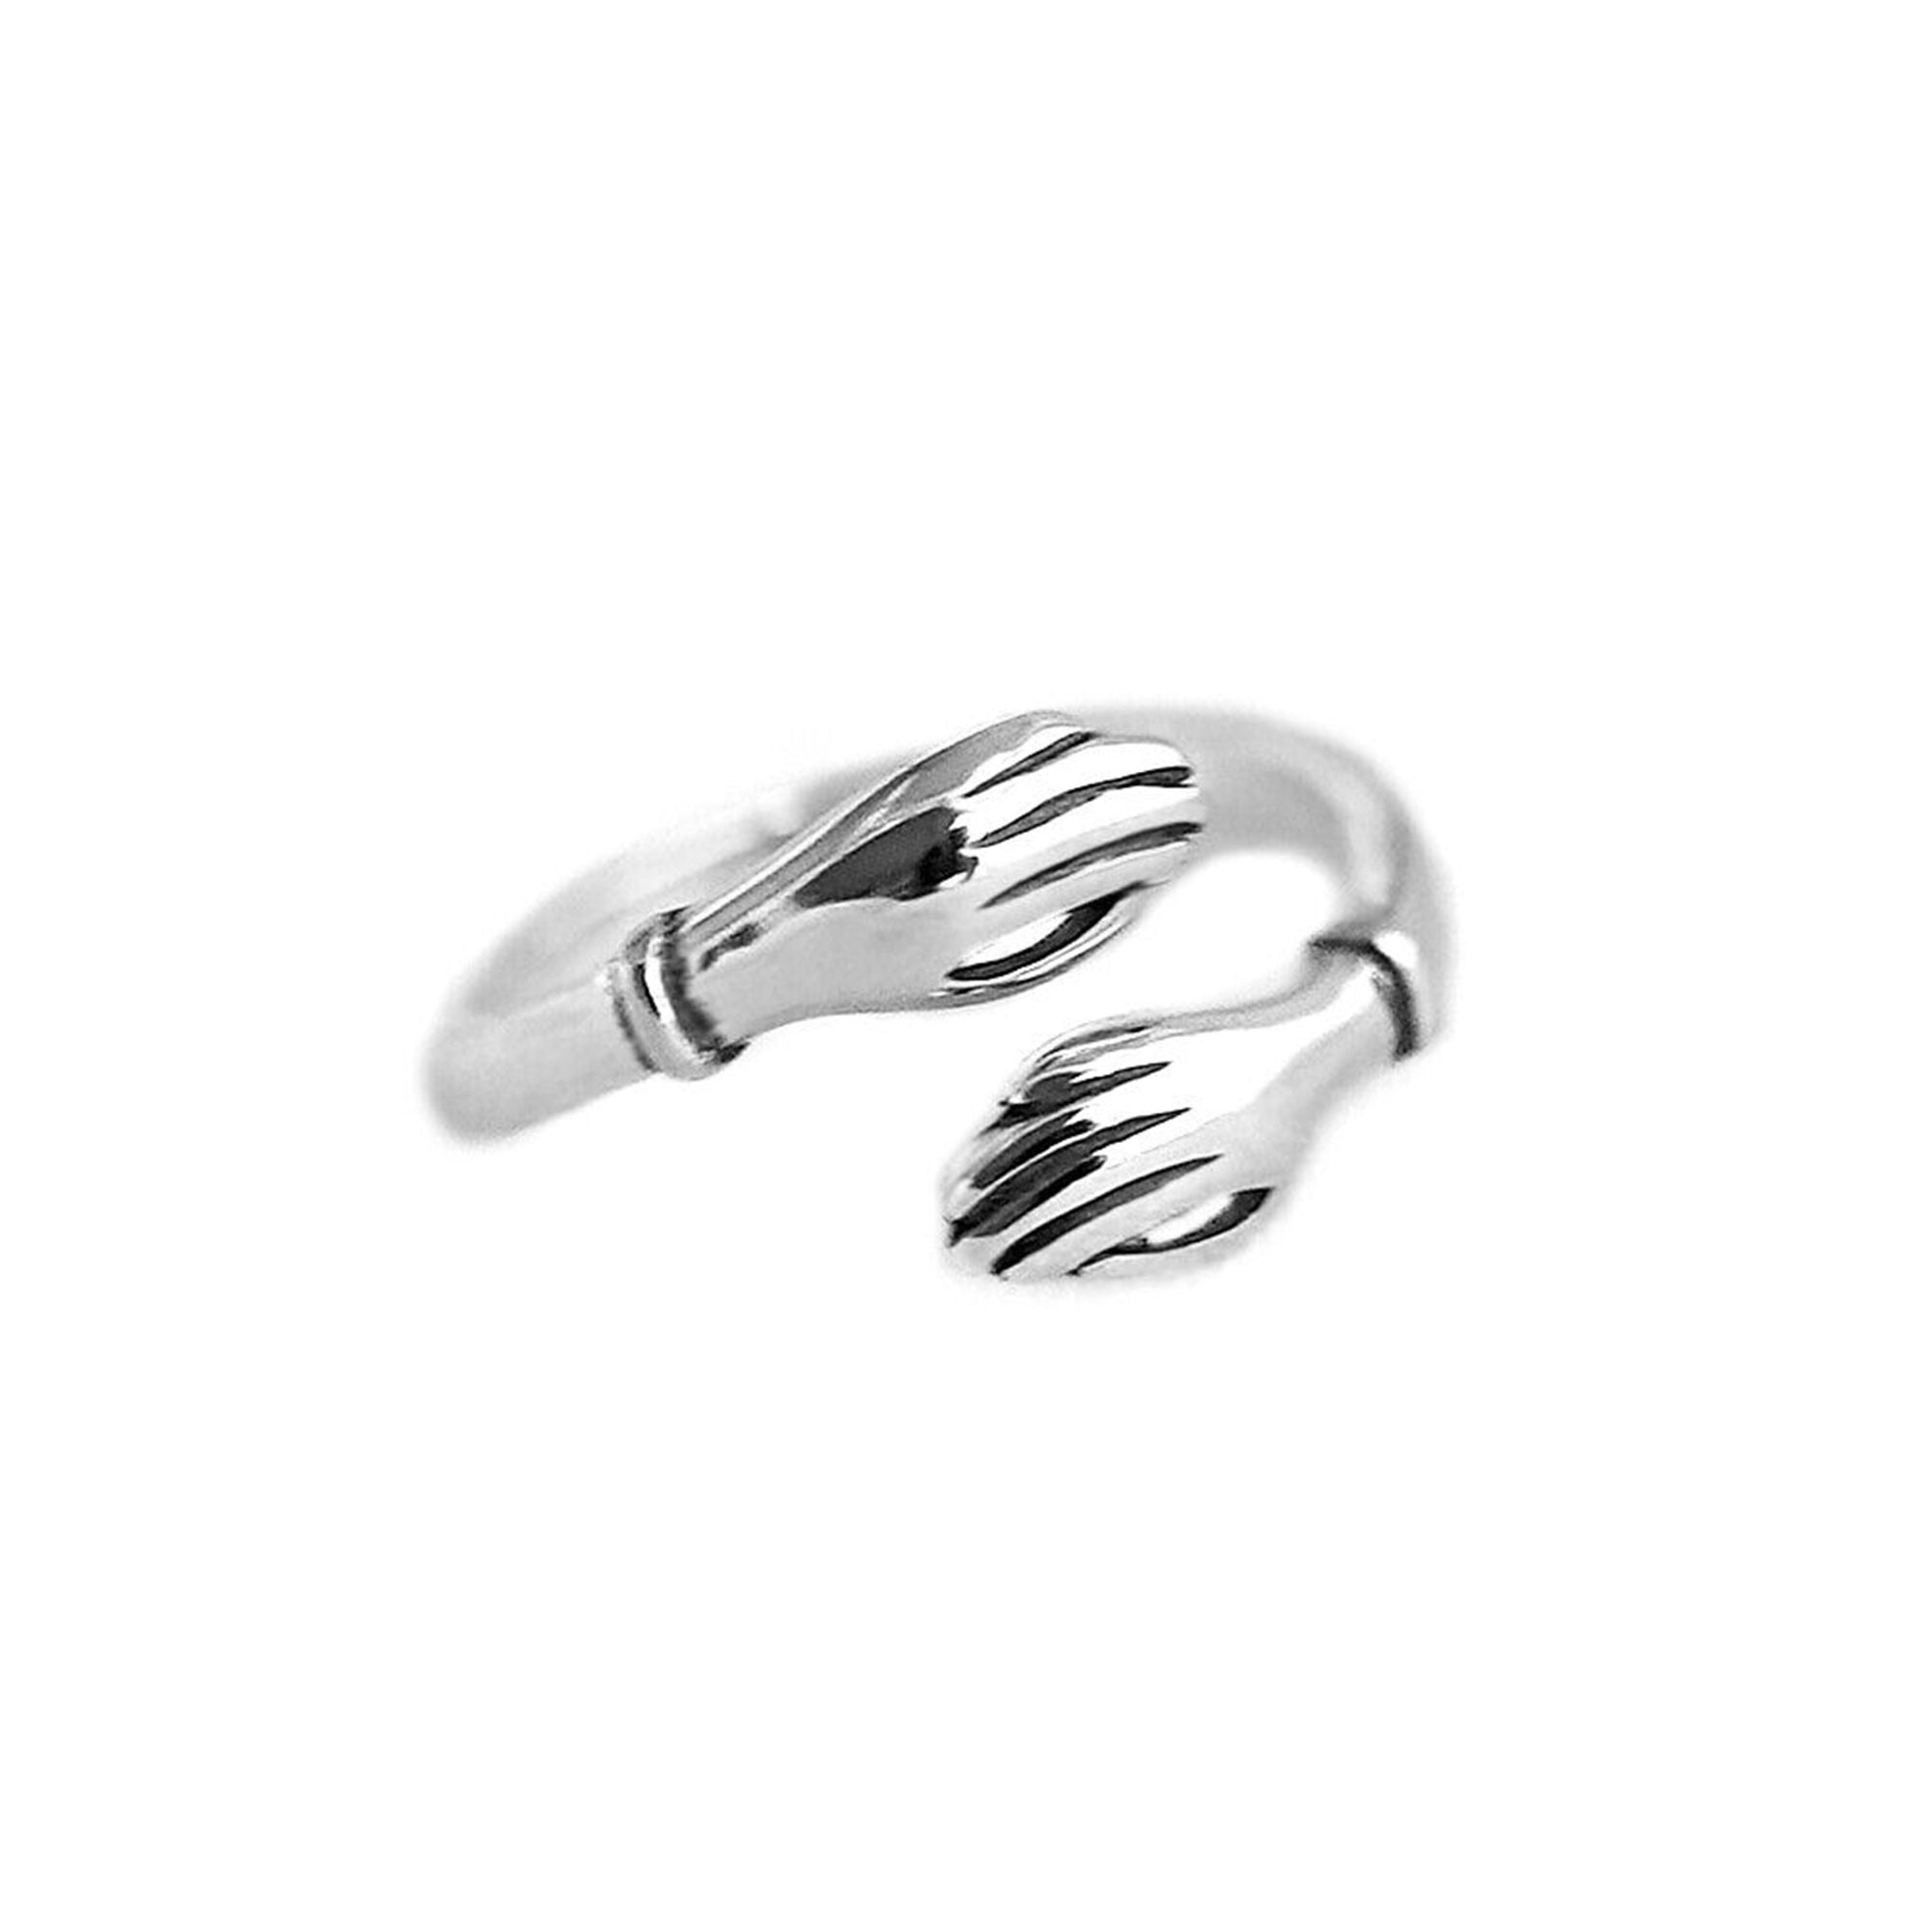 friendship ring for 2 - Buy friendship ring for 2 at Best Price in Malaysia  | h5.lazada.com.my